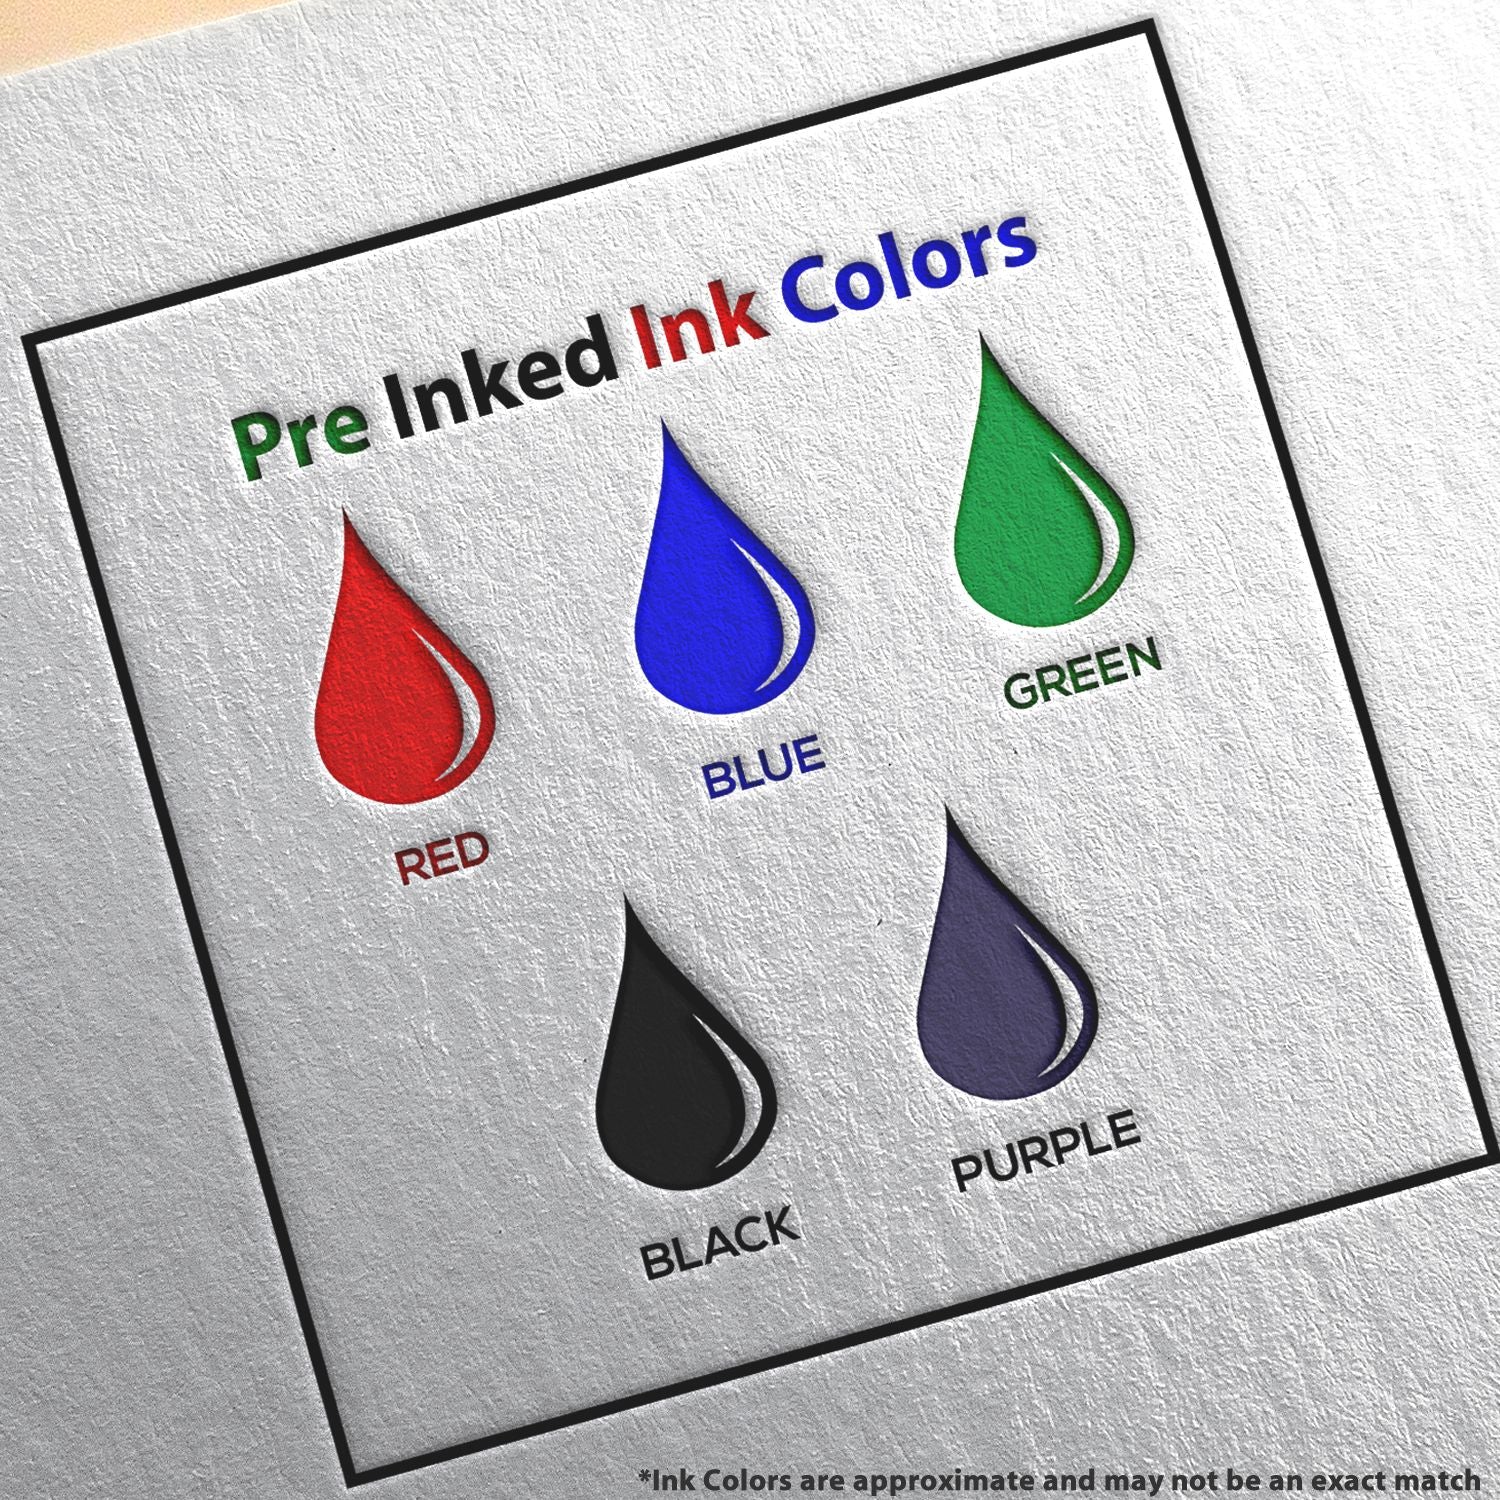 A picture showing the different ink colors or hues available for the Premium MaxLight Pre-Inked Delaware Landscape Architectural Stamp product.